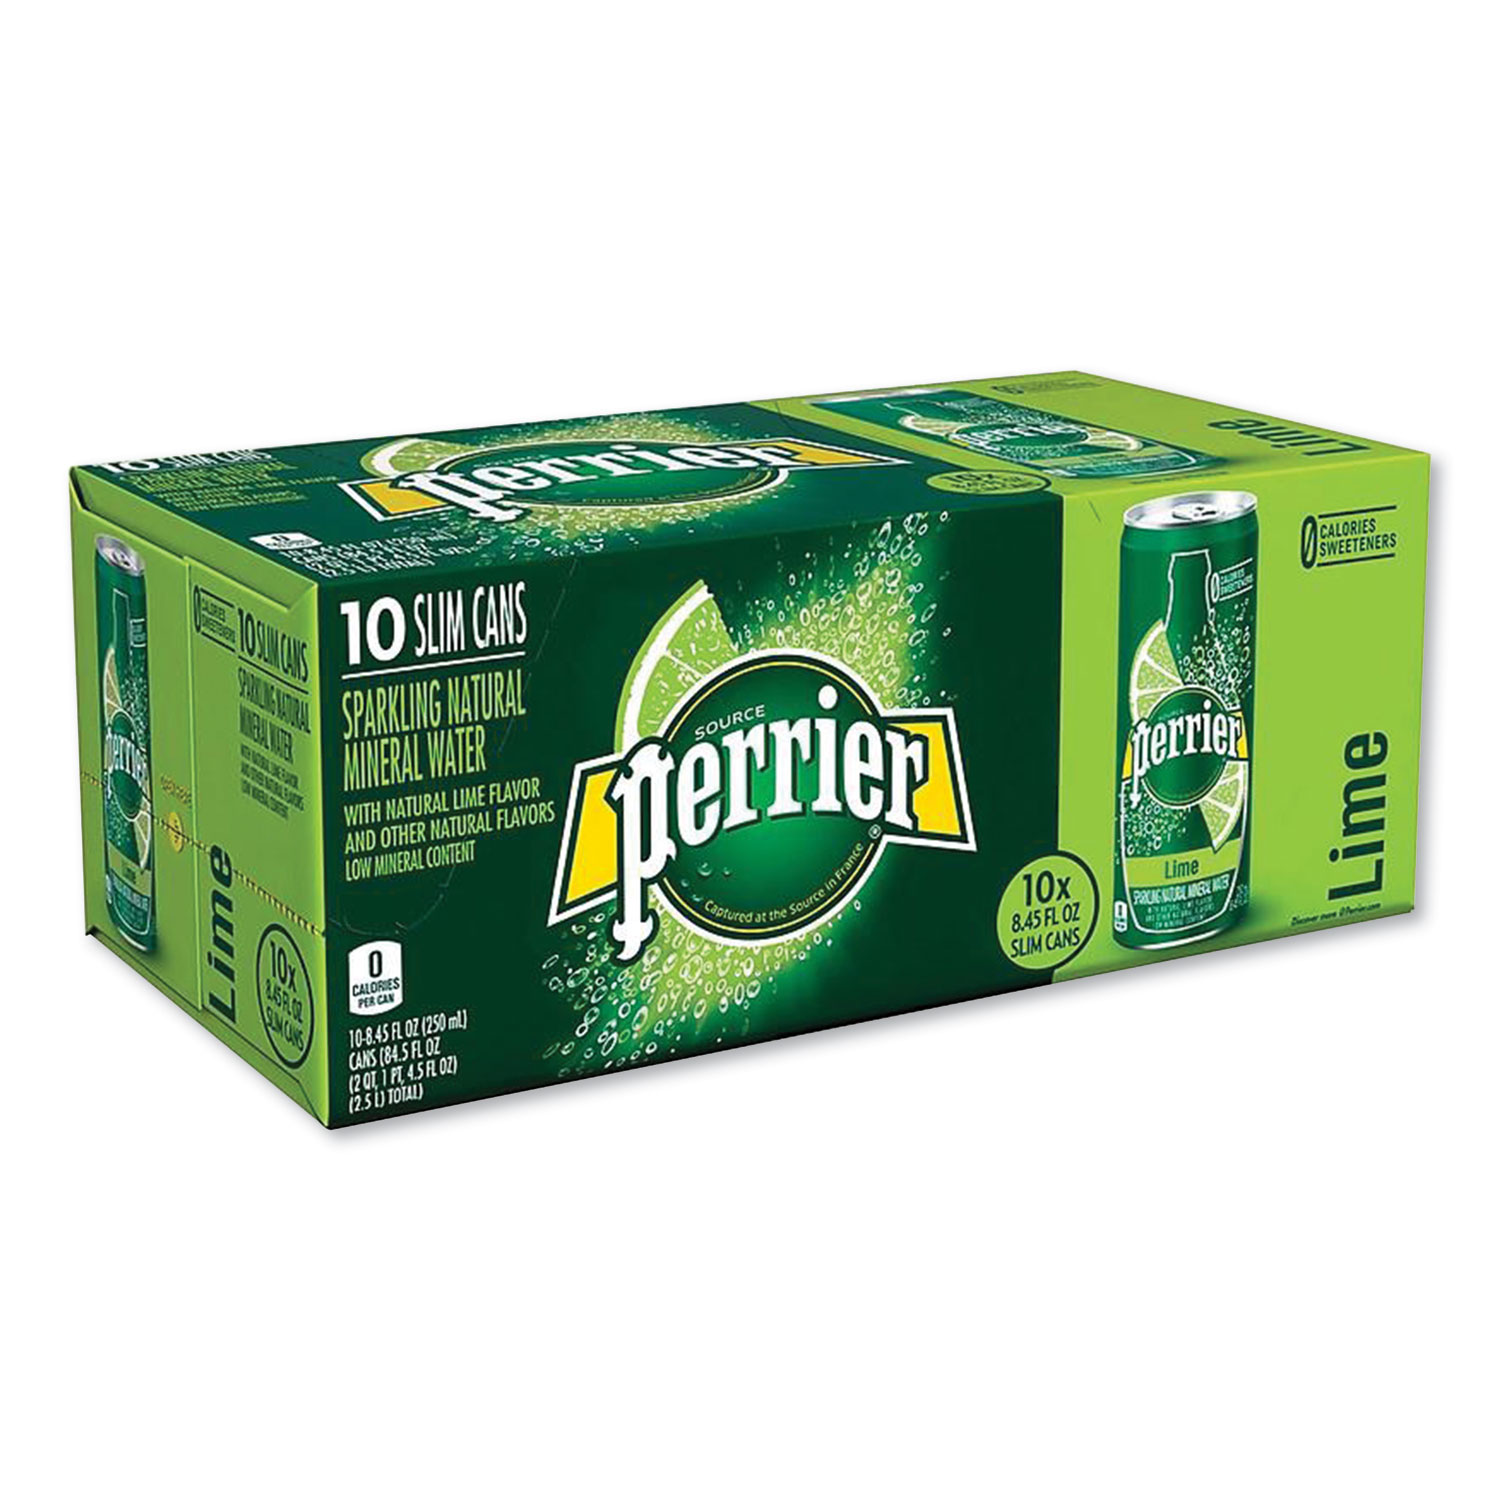  Perrier 12283036 Sparkling Natural Mineral Water, Lime, 8.45 oz Can, 10 Cans/Pack (PRR85718) 